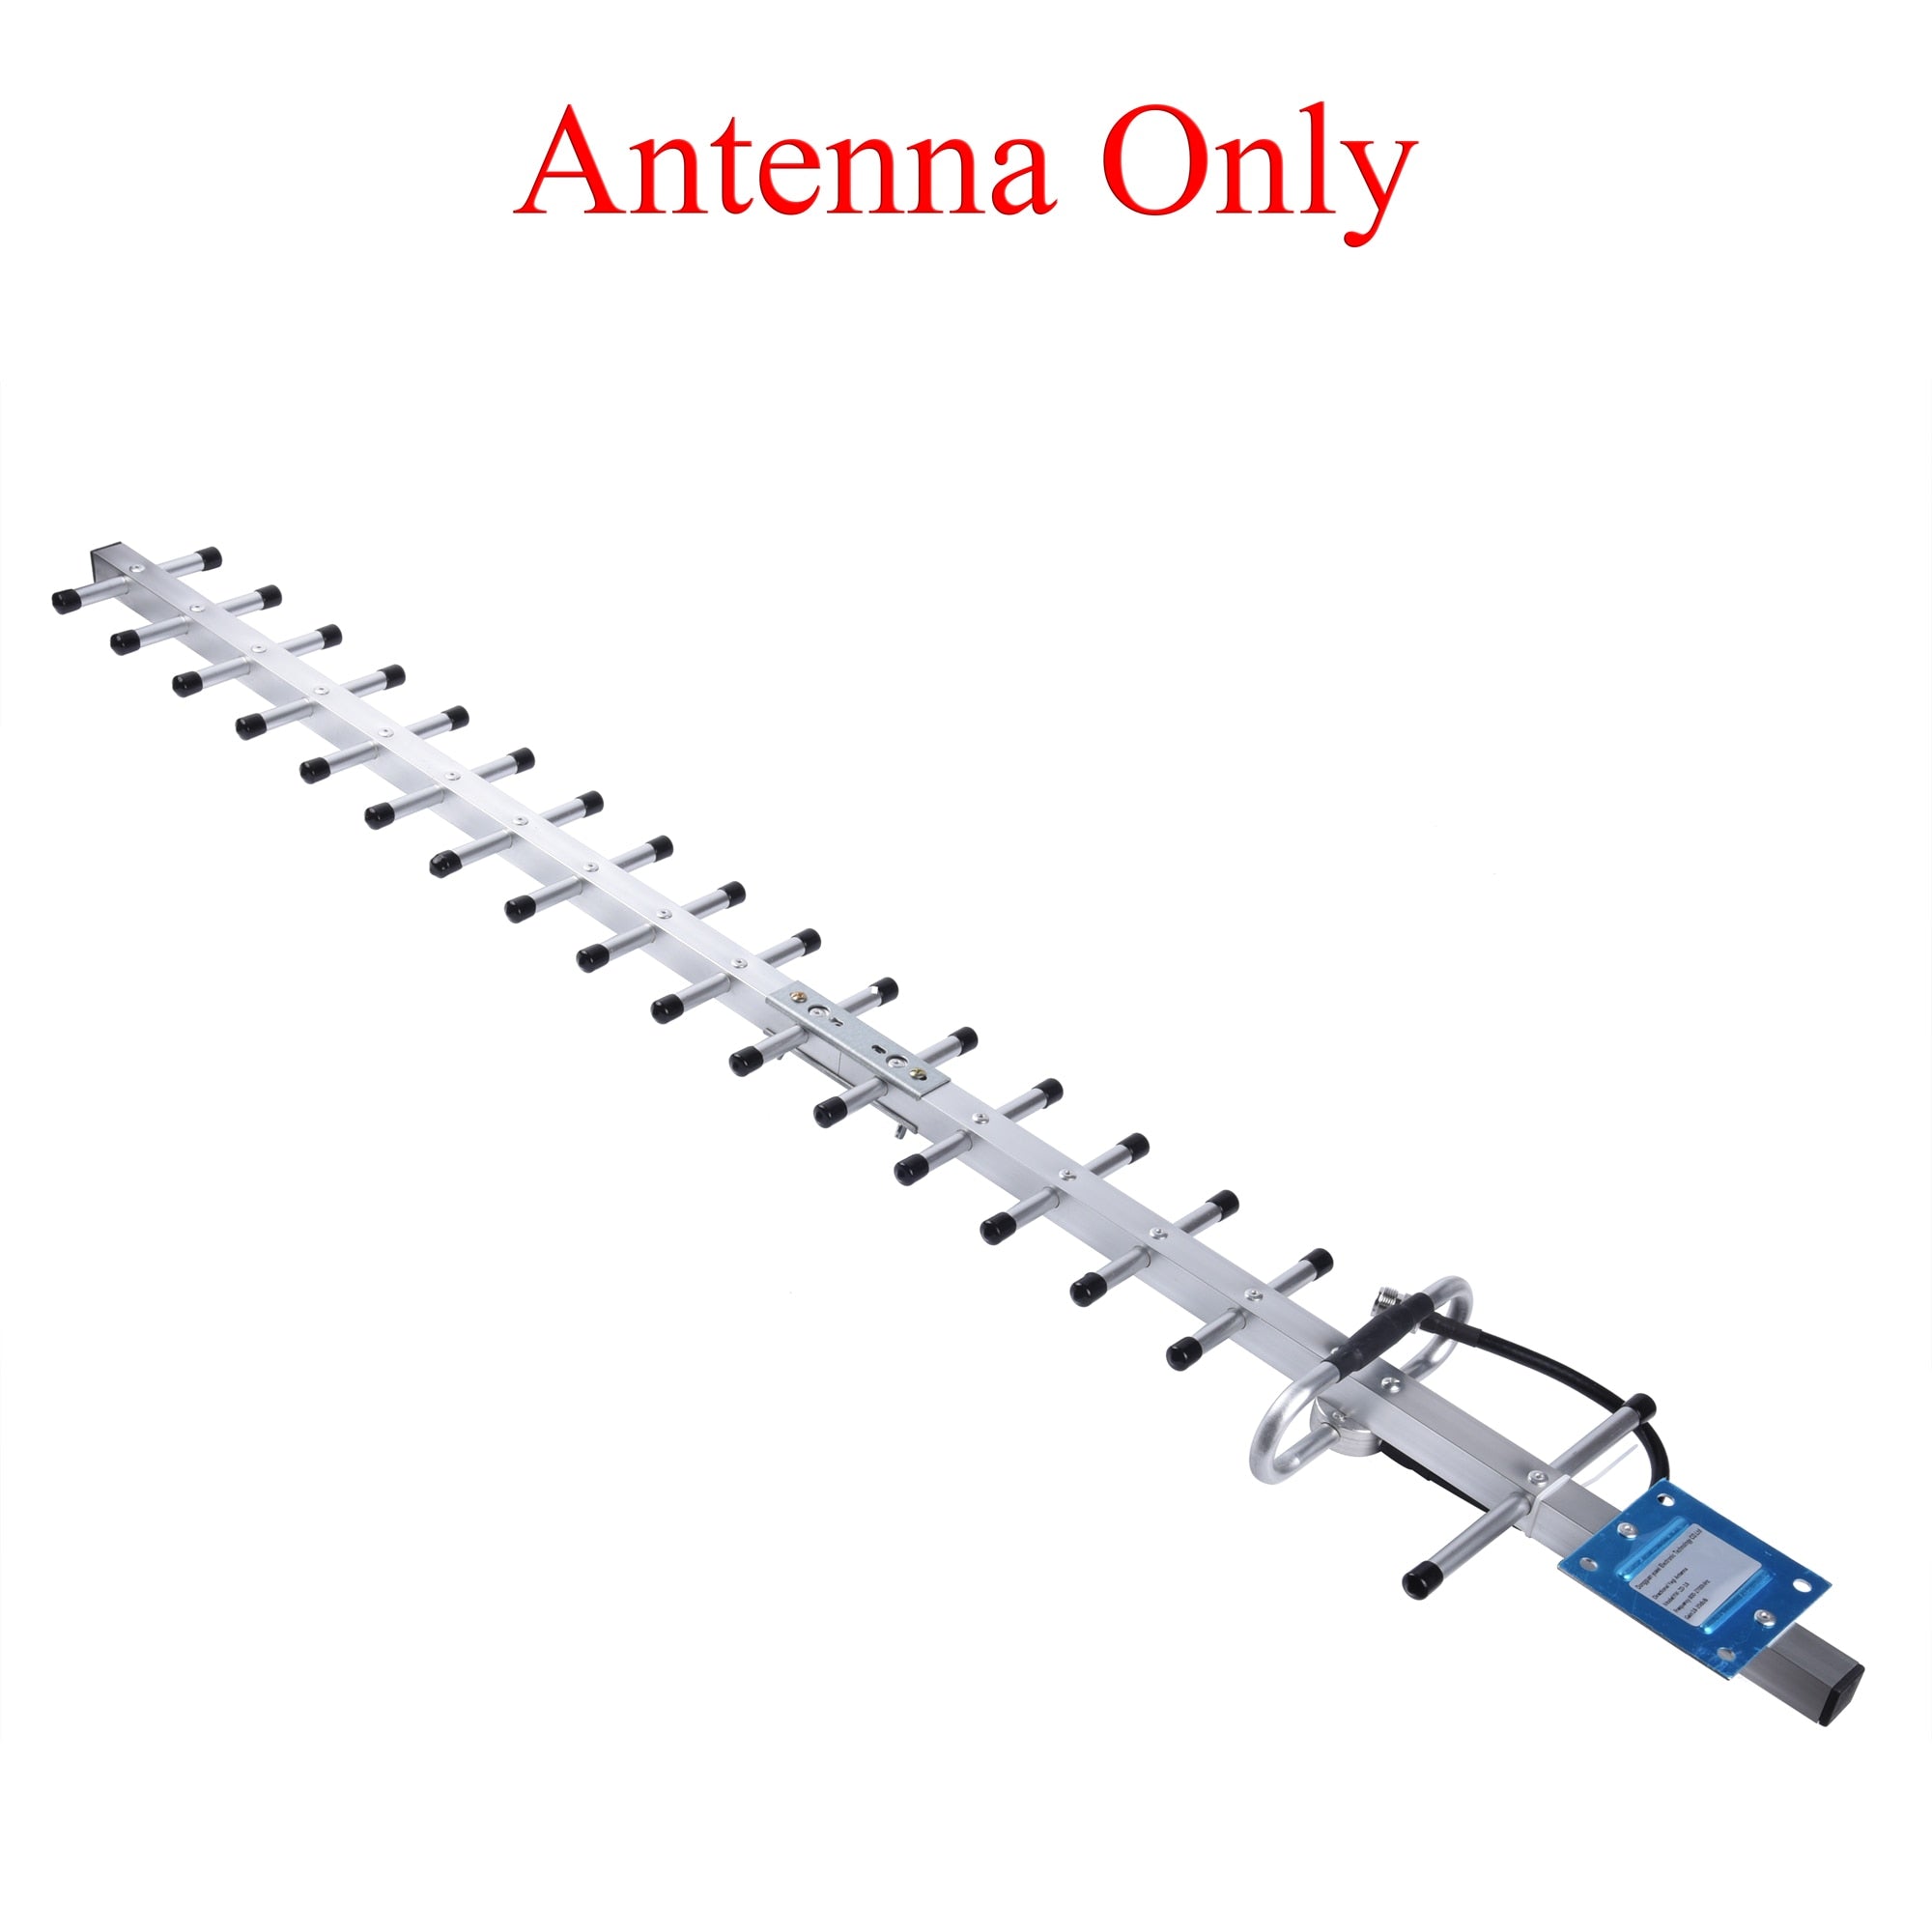 FR&RU Warehouse 20dBi 2G/3G/4G LTE Yagi Antenna 824-2700MHz N Female External Outdoor Antenna For Mobile Signal Booster Repeater